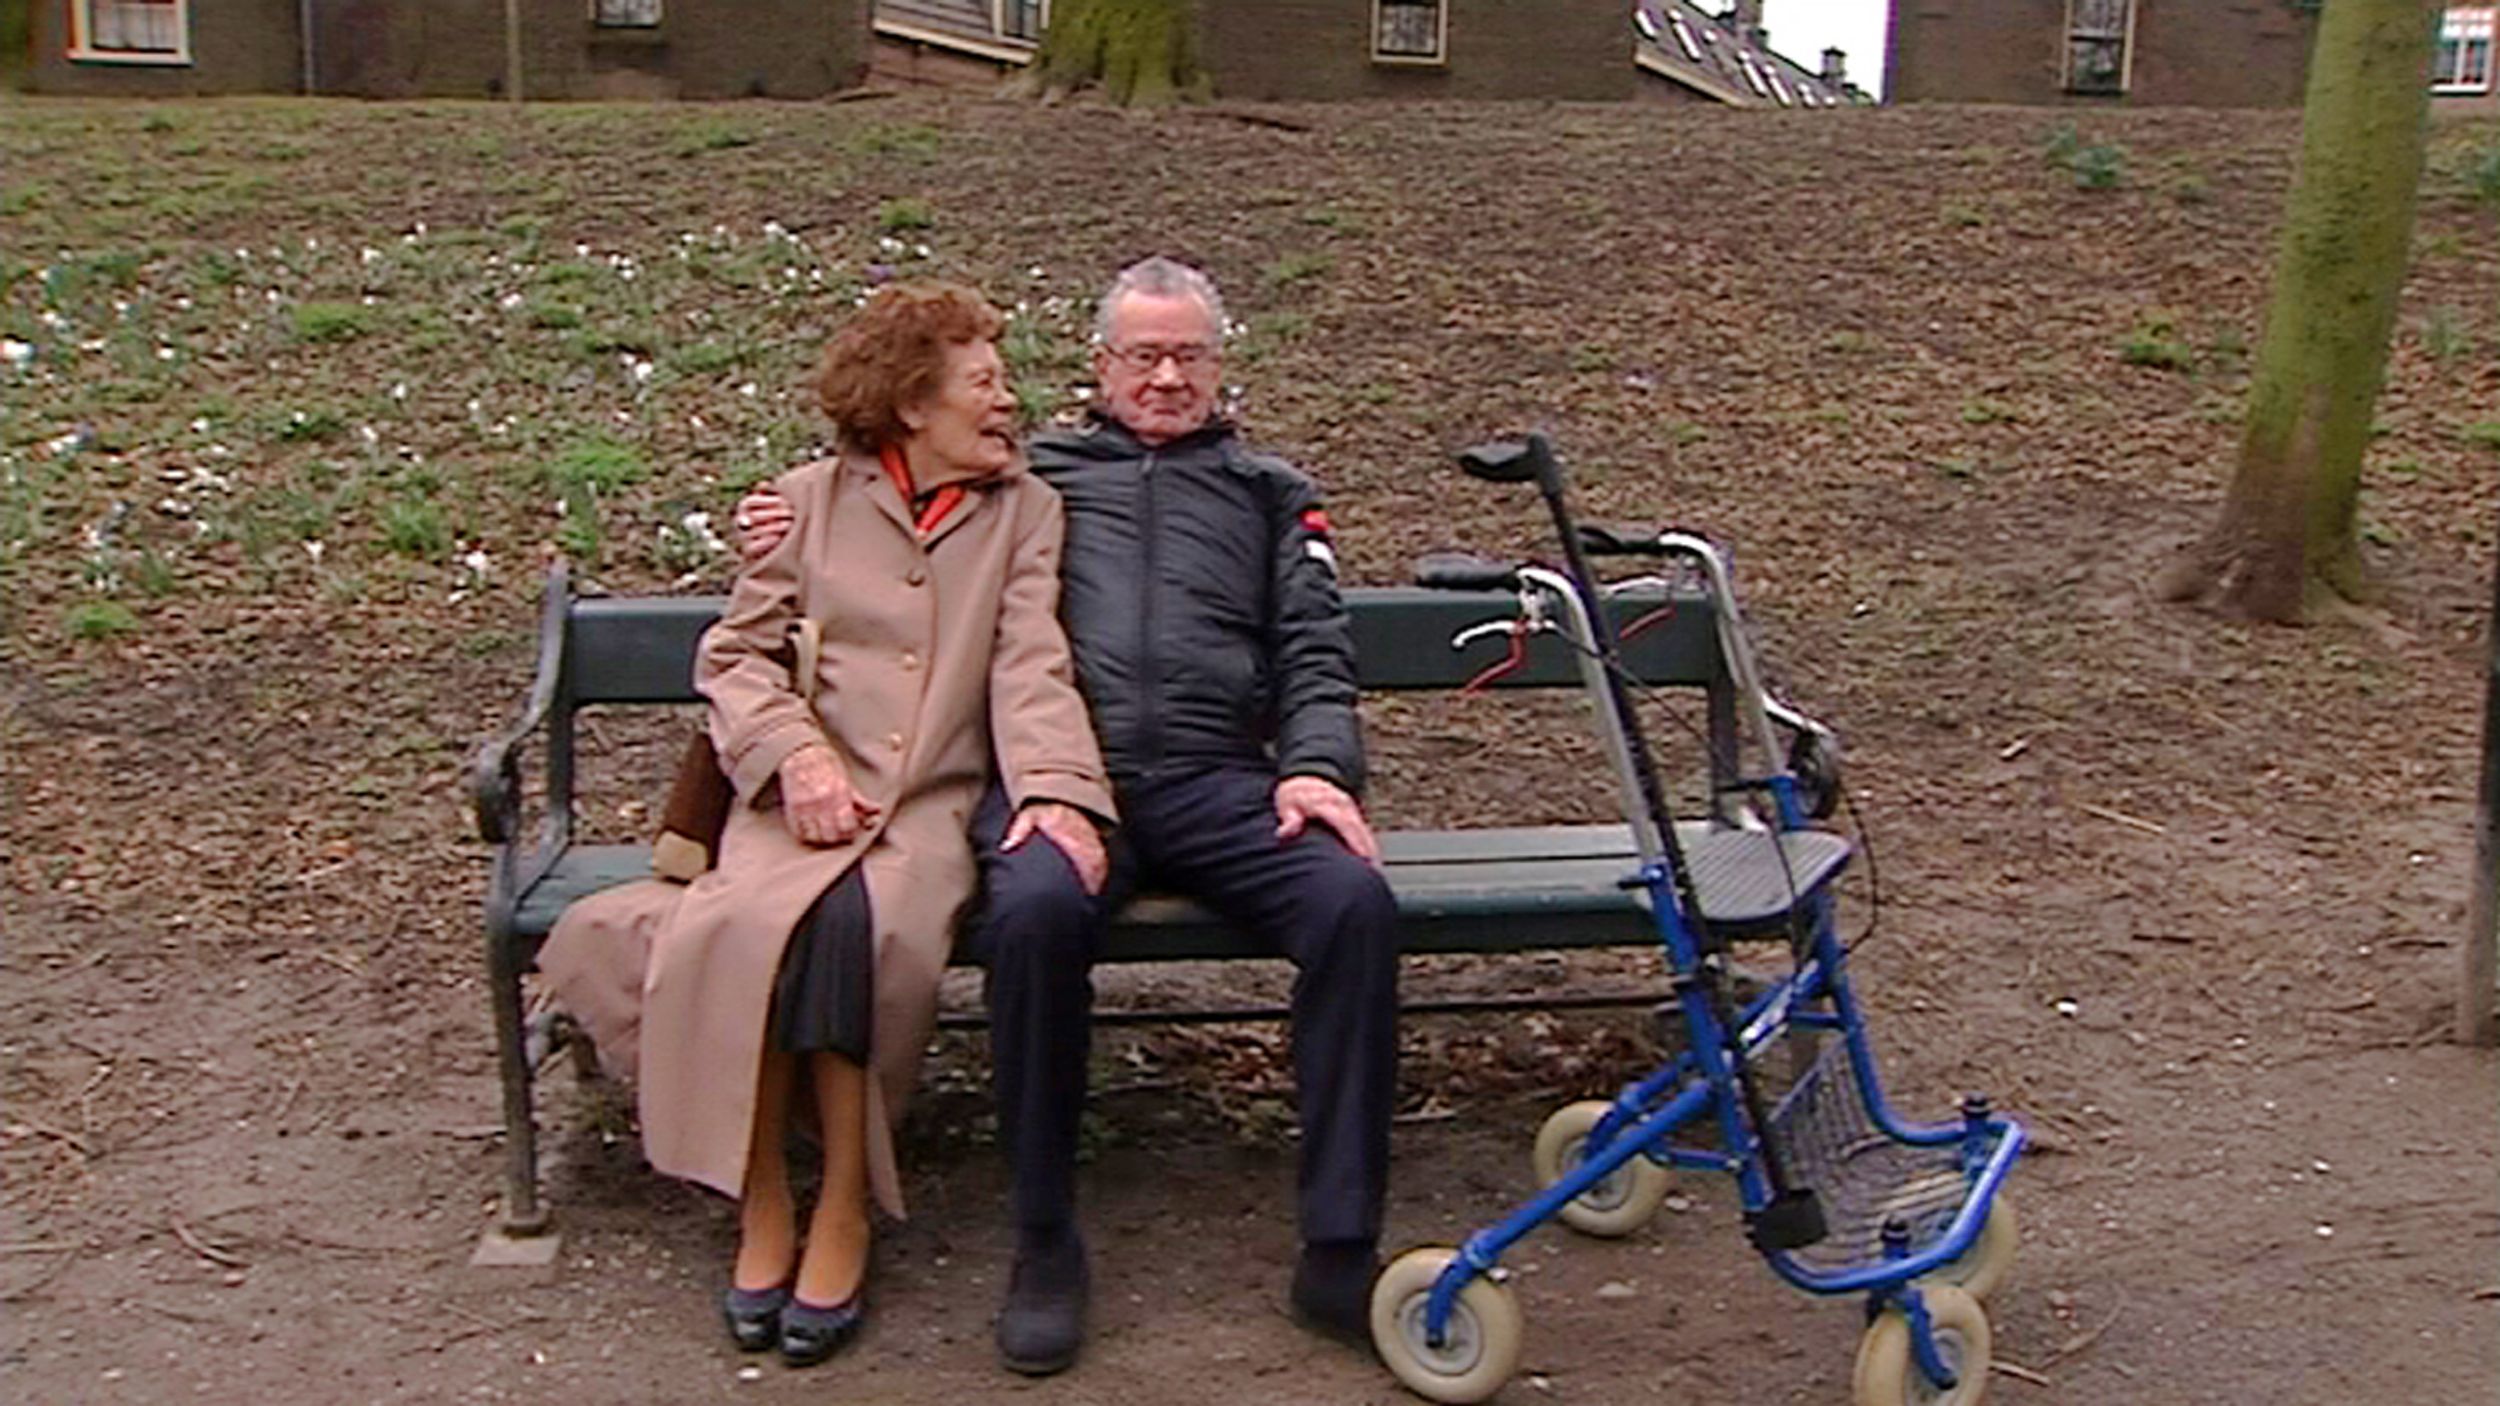 In Love at Old Age: Gré and Jaap